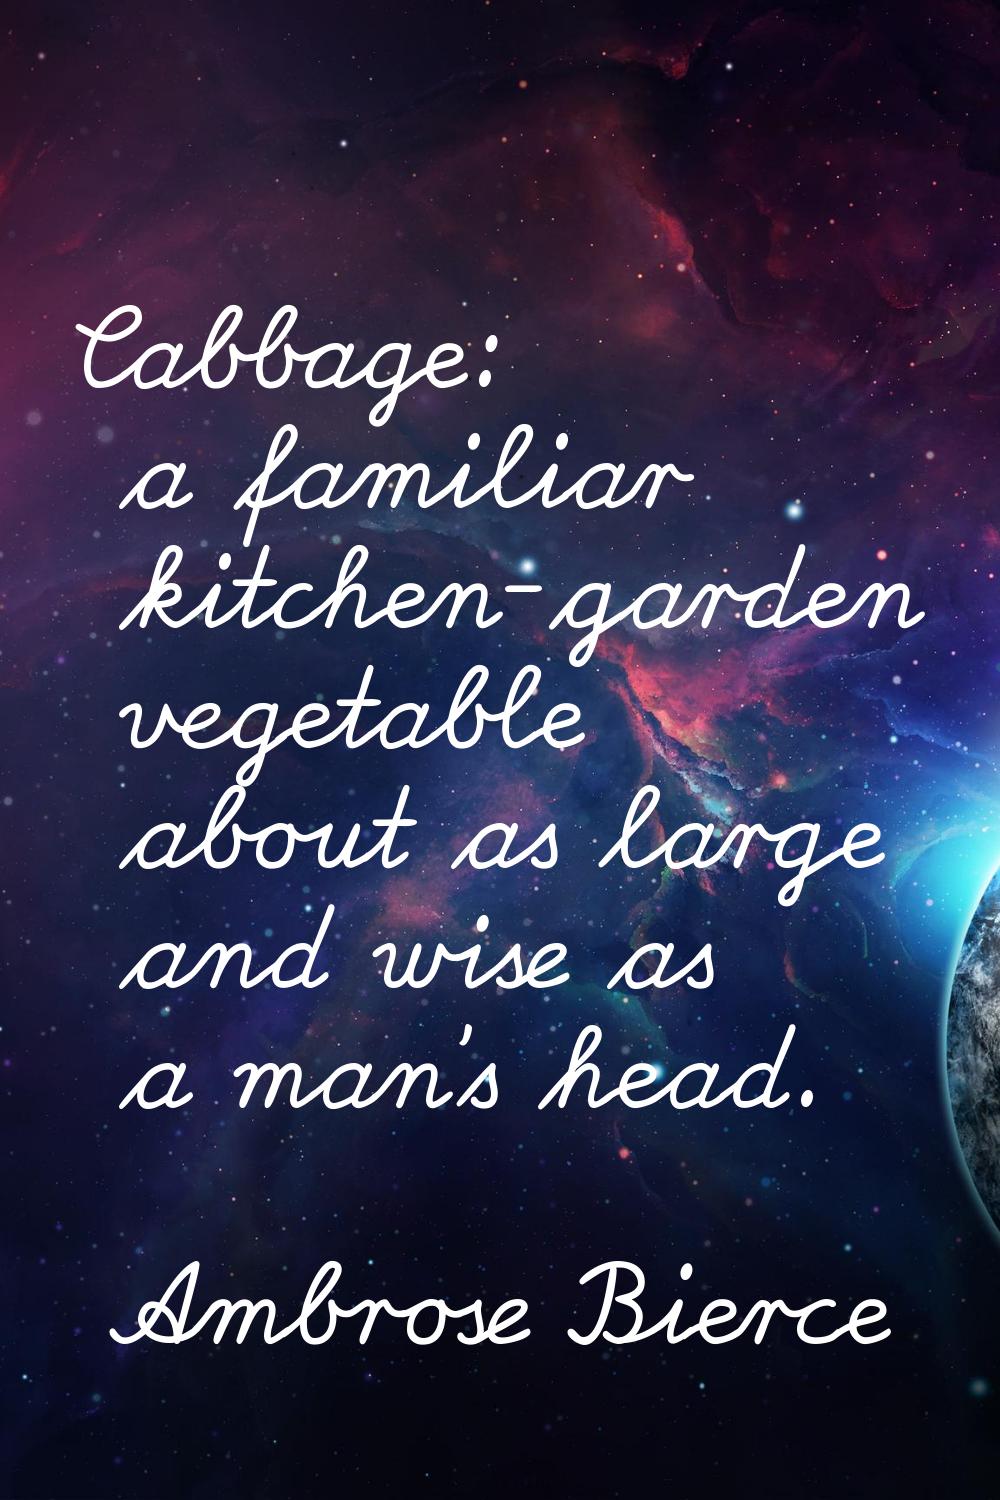 Cabbage: a familiar kitchen-garden vegetable about as large and wise as a man's head.